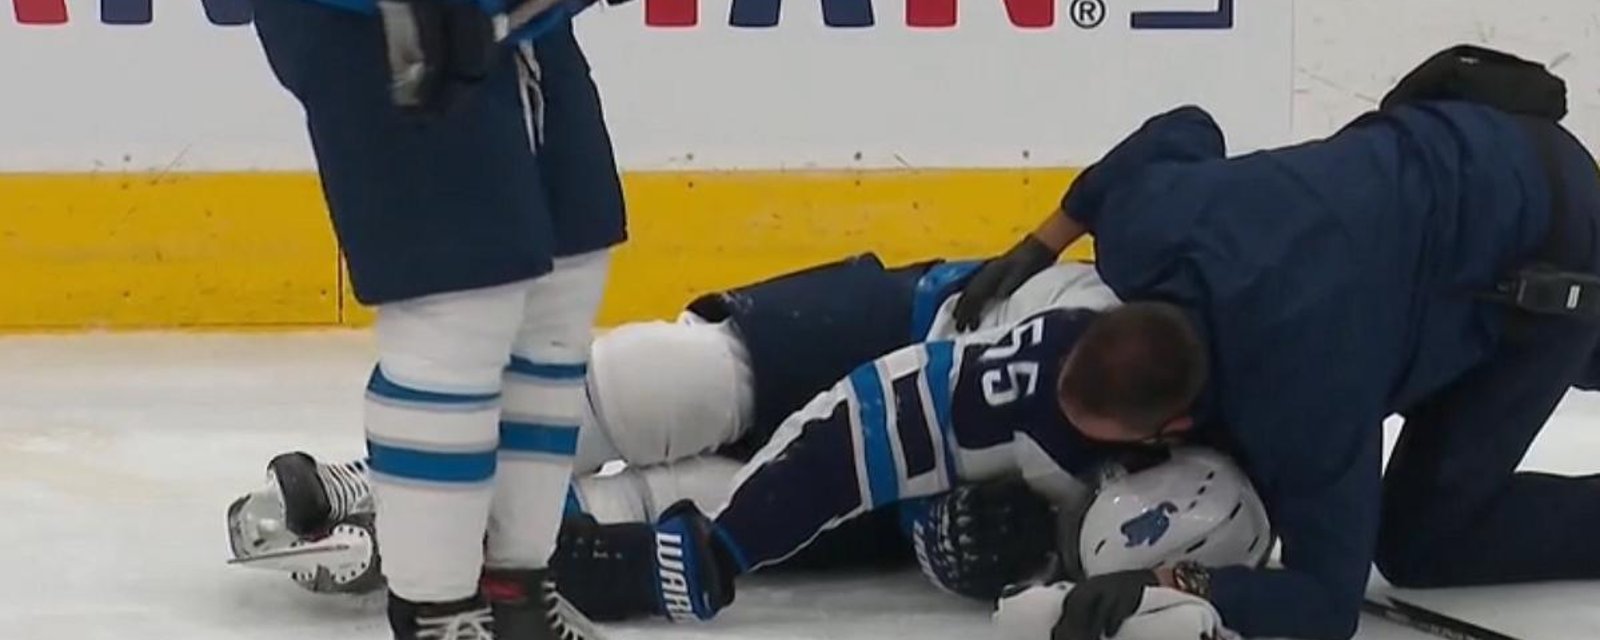 Paul Maurice calls out Tkachuk for “dirty” attack on Scheifele.